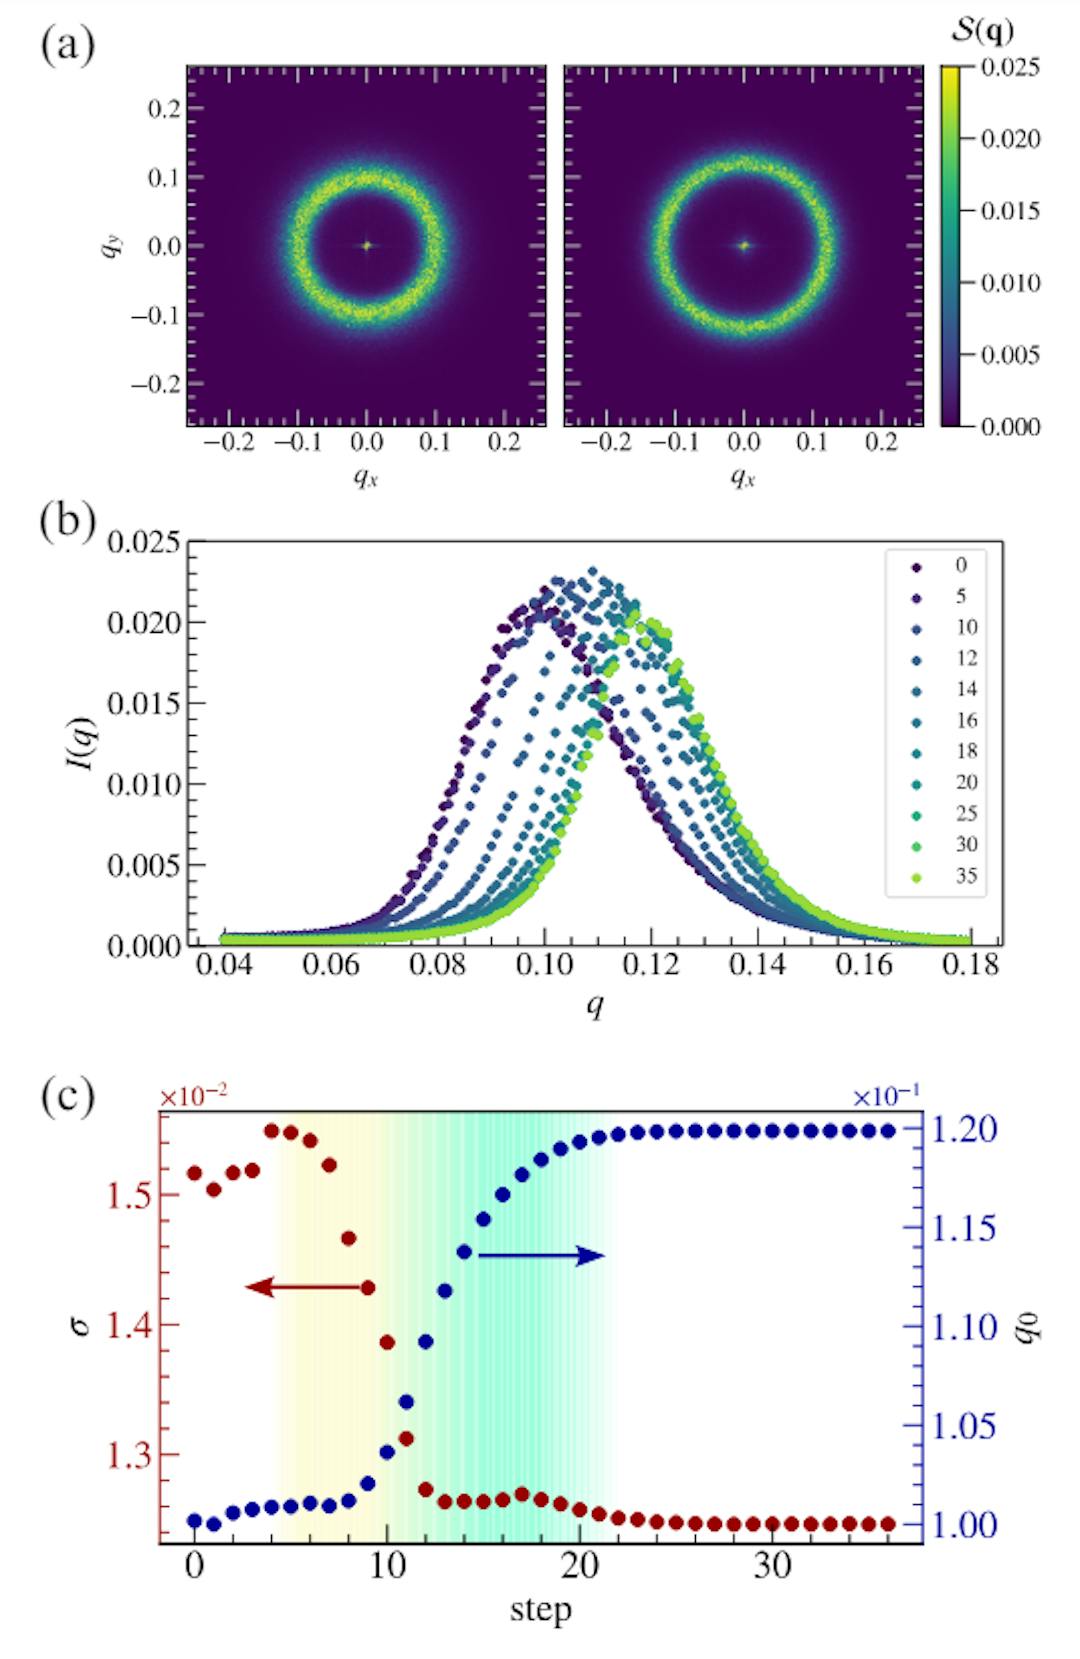 FIG. 2. (a) Structure factor of the image S(q) for (left) the quenched state with step 0 and (right) the annealed state with step 36. (b) The angle-averaged structure factor, I(q), for different steps represented by different colors. (c) Evolution of the peak width σ and the peak wave number q0 for I(q) represented by the red and the blue circles, respectively